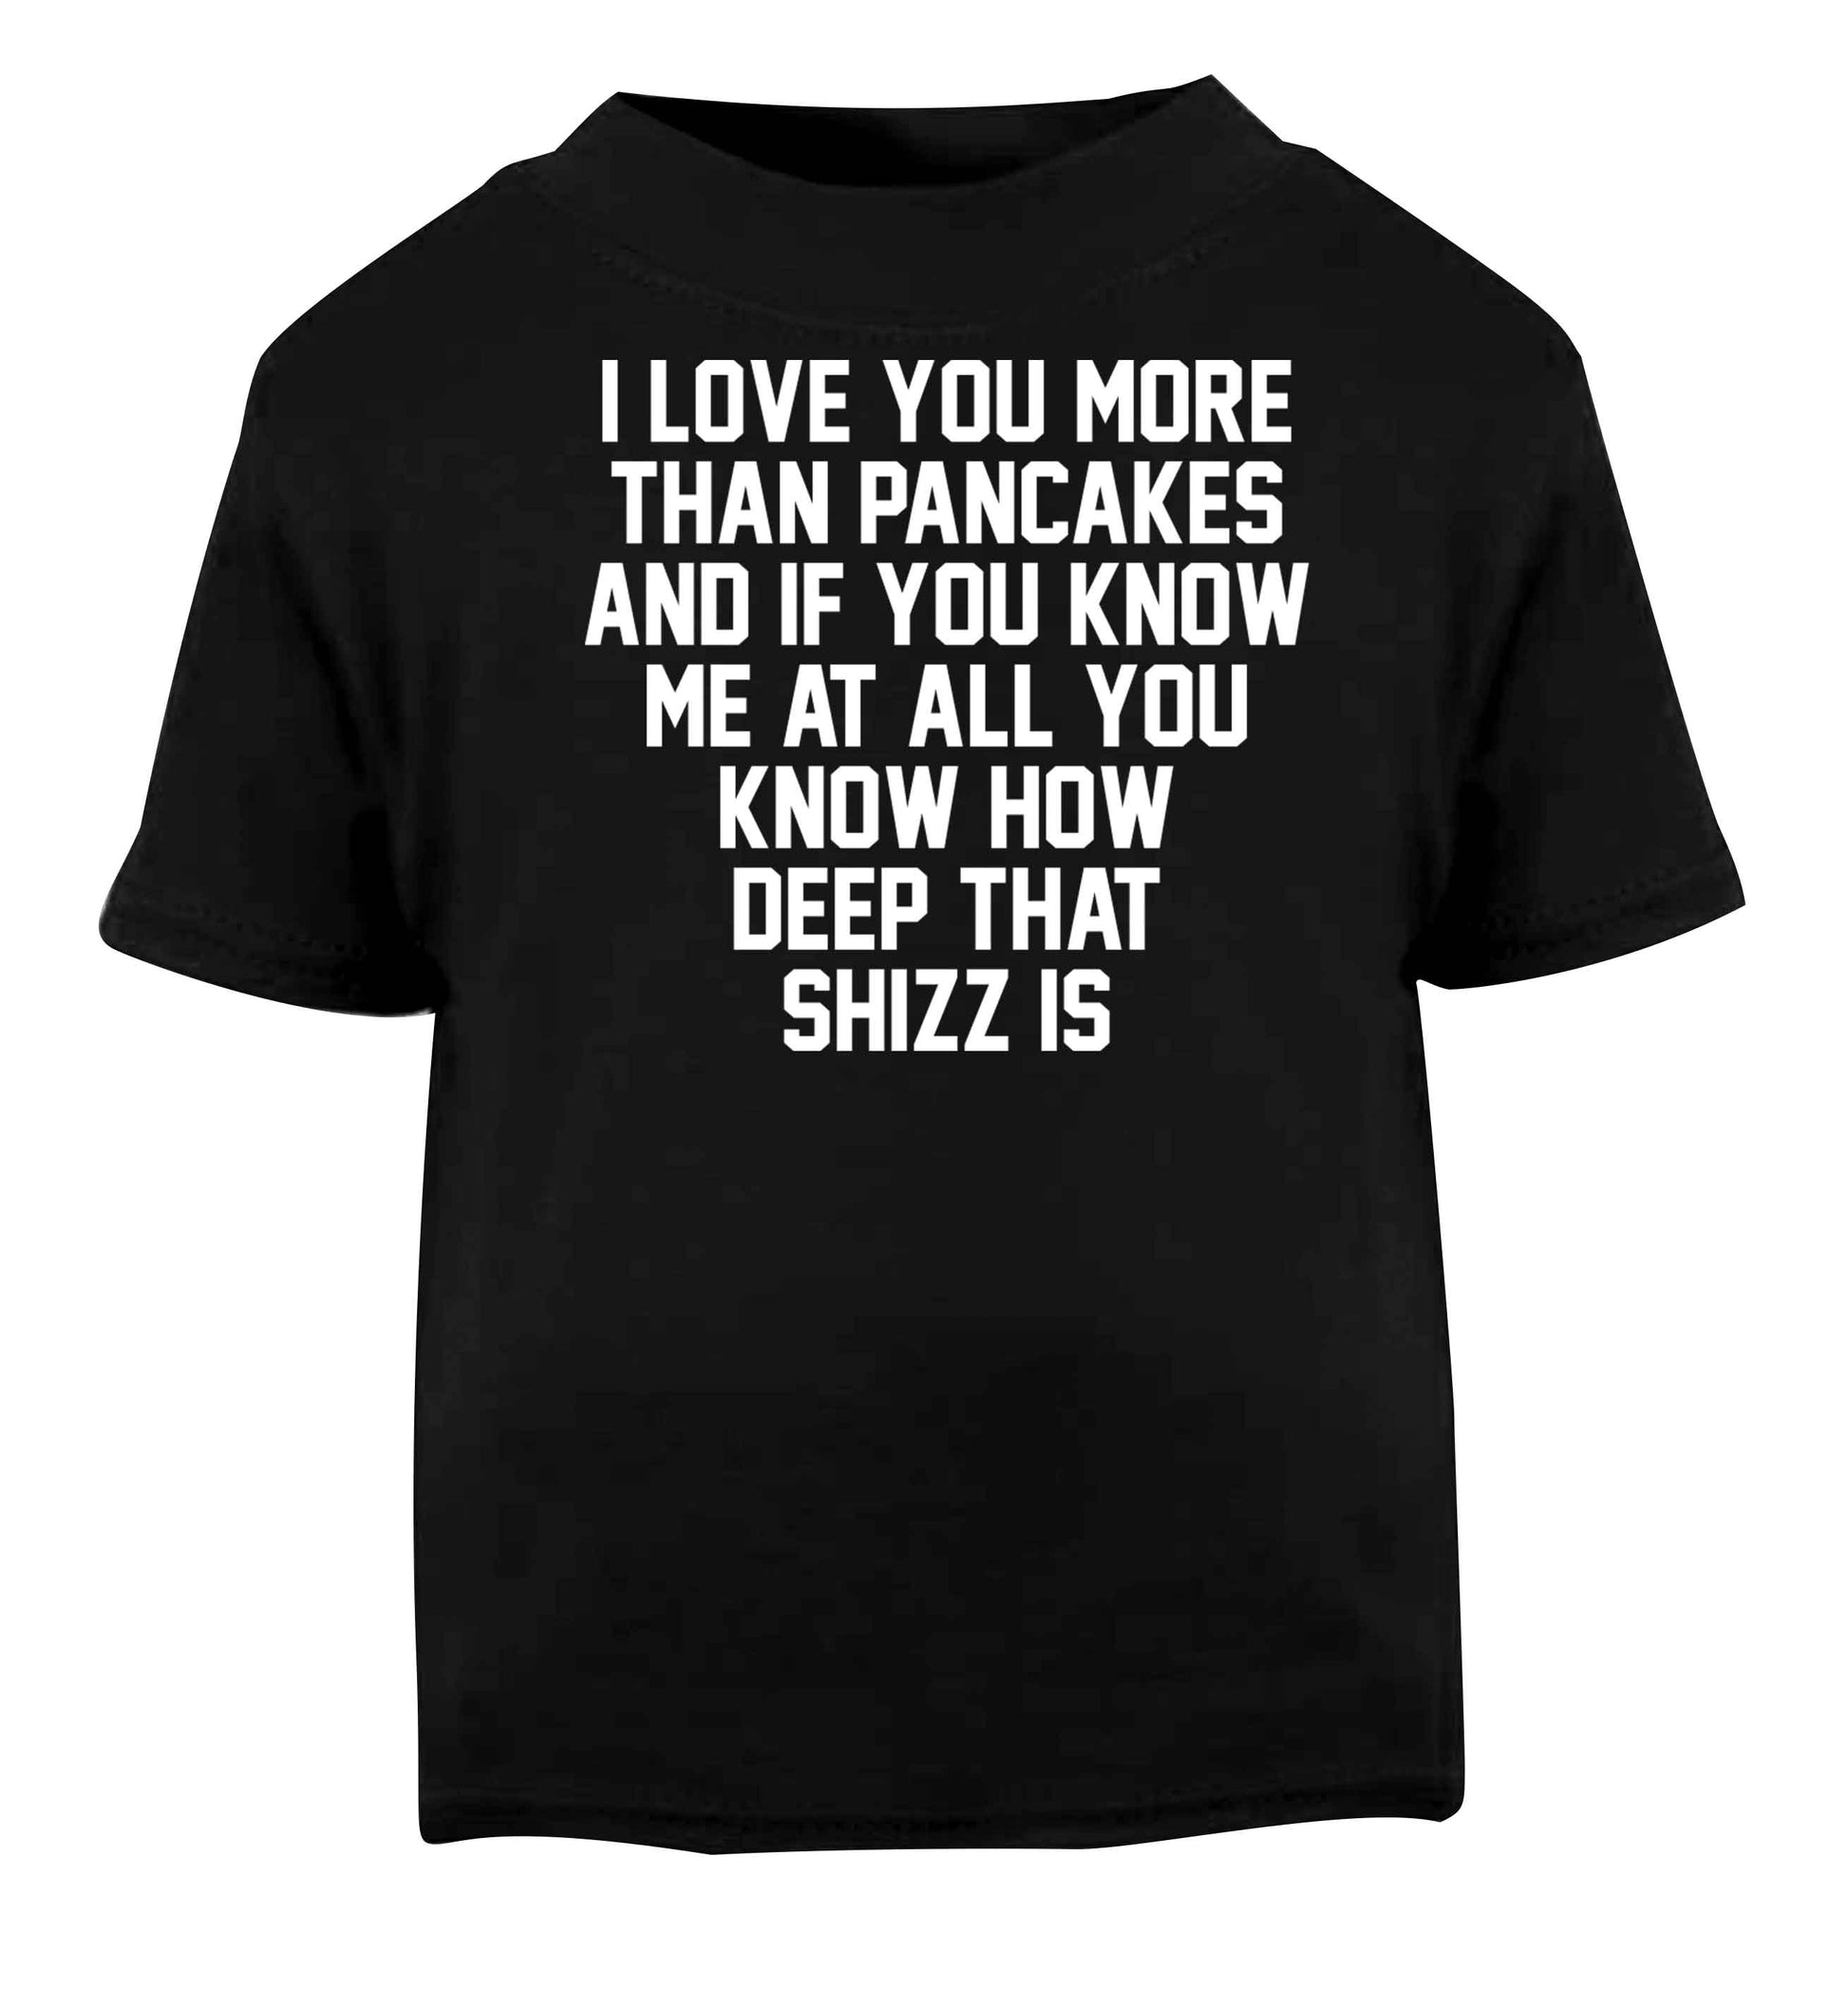 I love you more than pancakes and if you know me at all you know how deep that shizz is Black baby toddler Tshirt 2 years